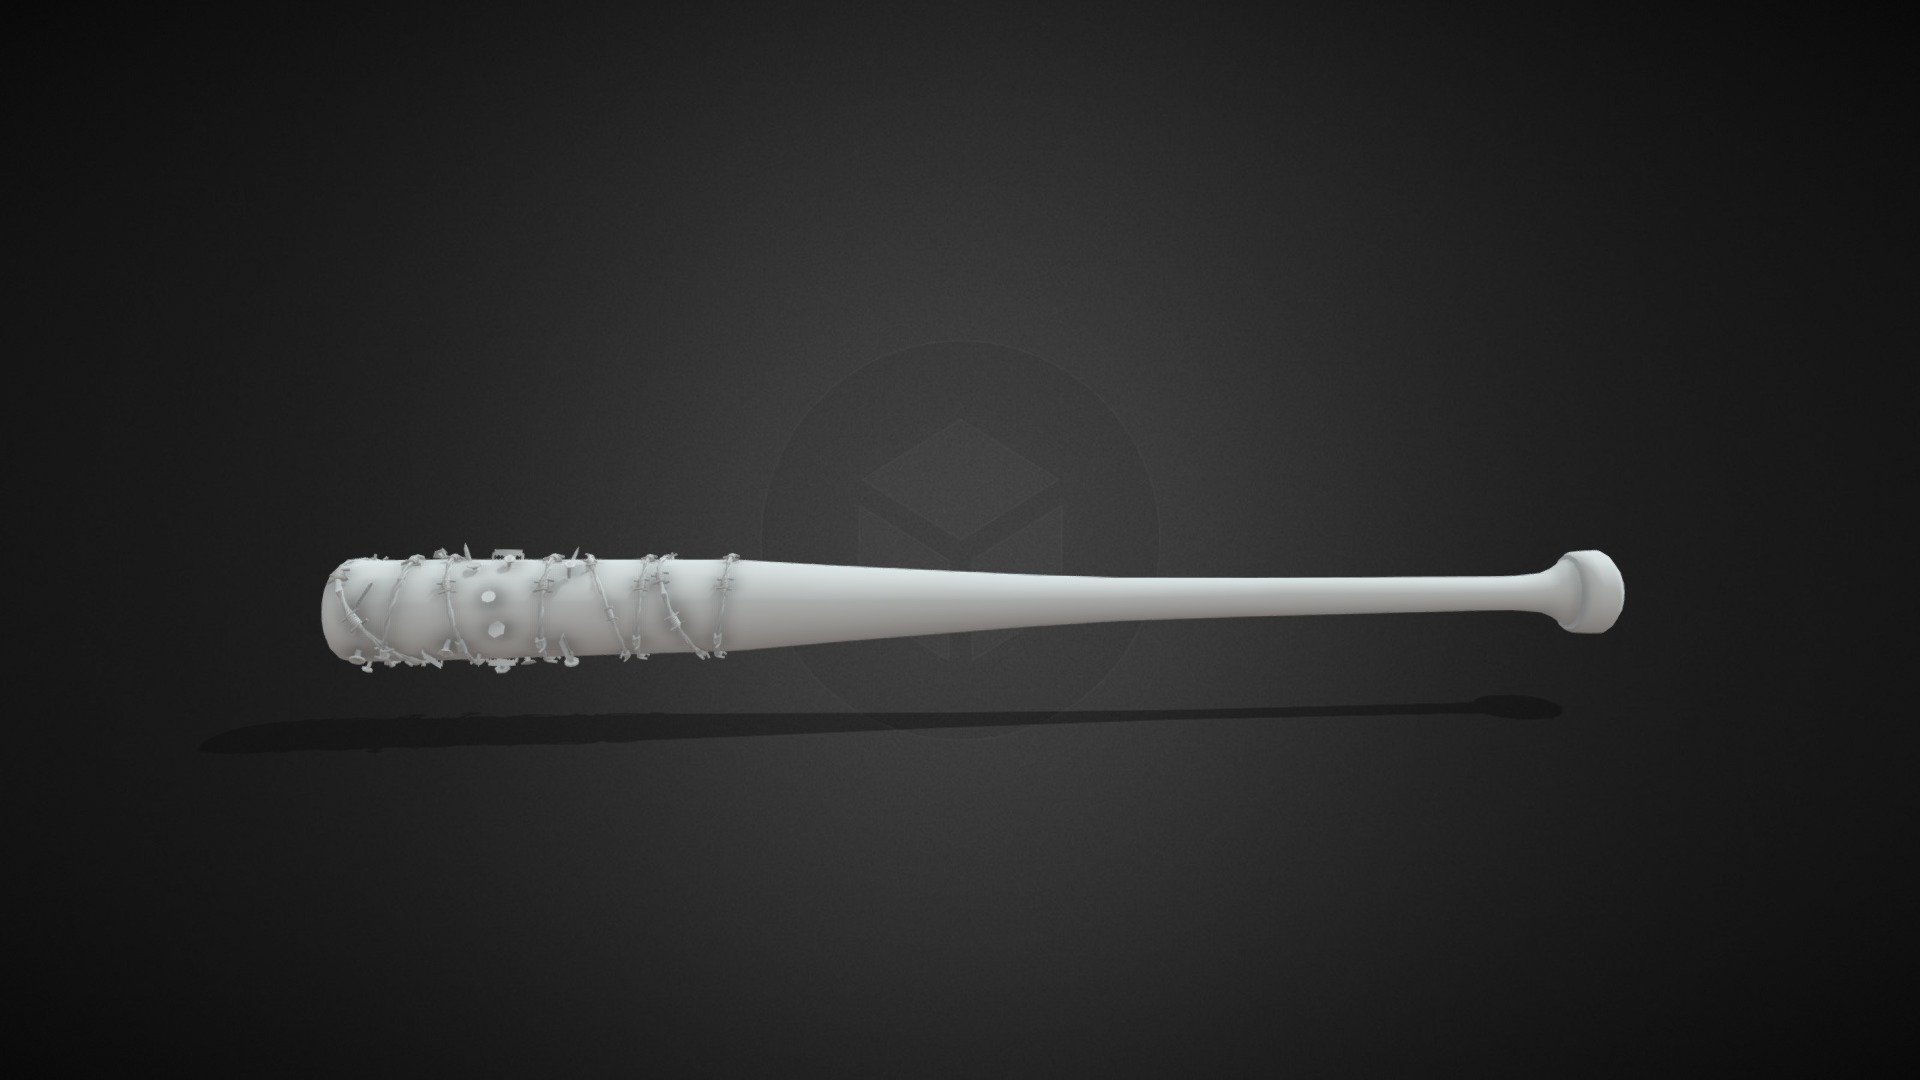 A weaponized post-apocalyptic baseball-bat inspired by the fallout franchise 3d model